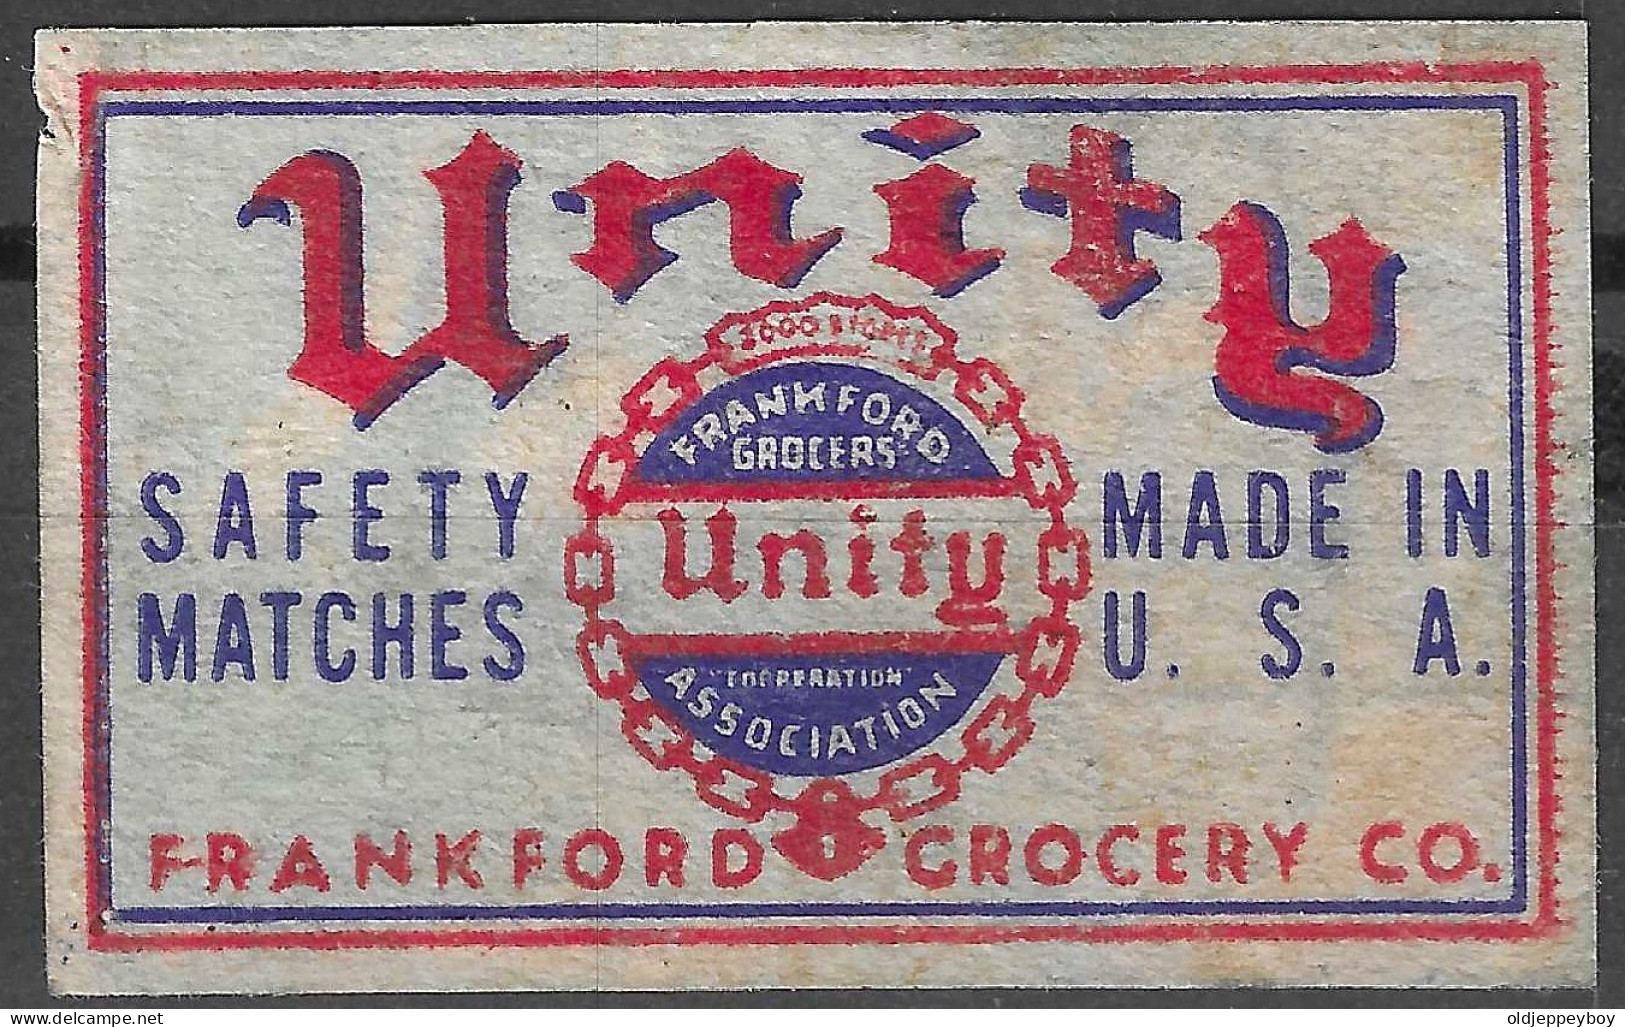  MADE IN U.S.A  Phillumeny MATCHBOX LABEL UNITY FRANKFORD GROCERY CO.  3.5 X 5 CM - Boites D'allumettes - Etiquettes